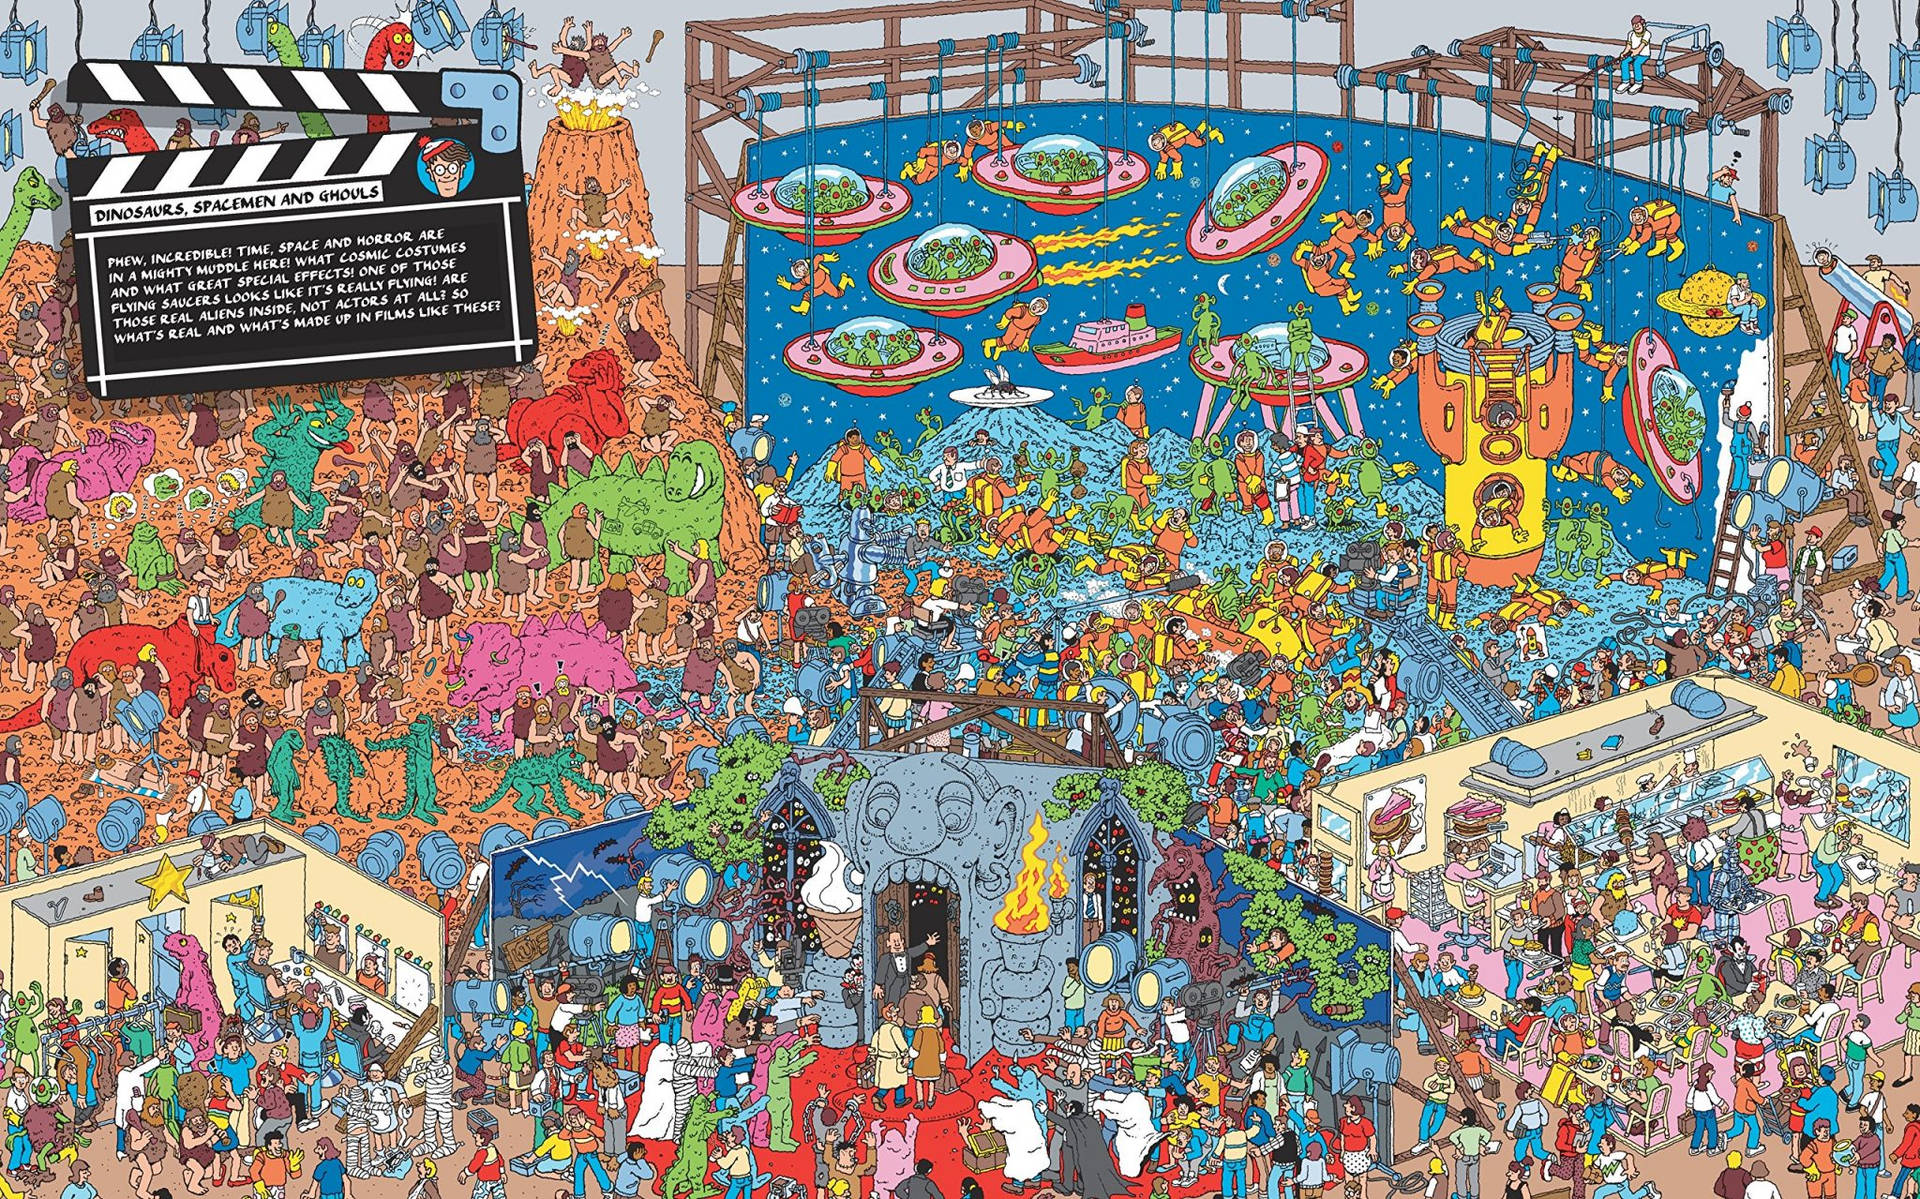 Where's Waldo Dinosaurs, Spacemen, And Ghouls Background